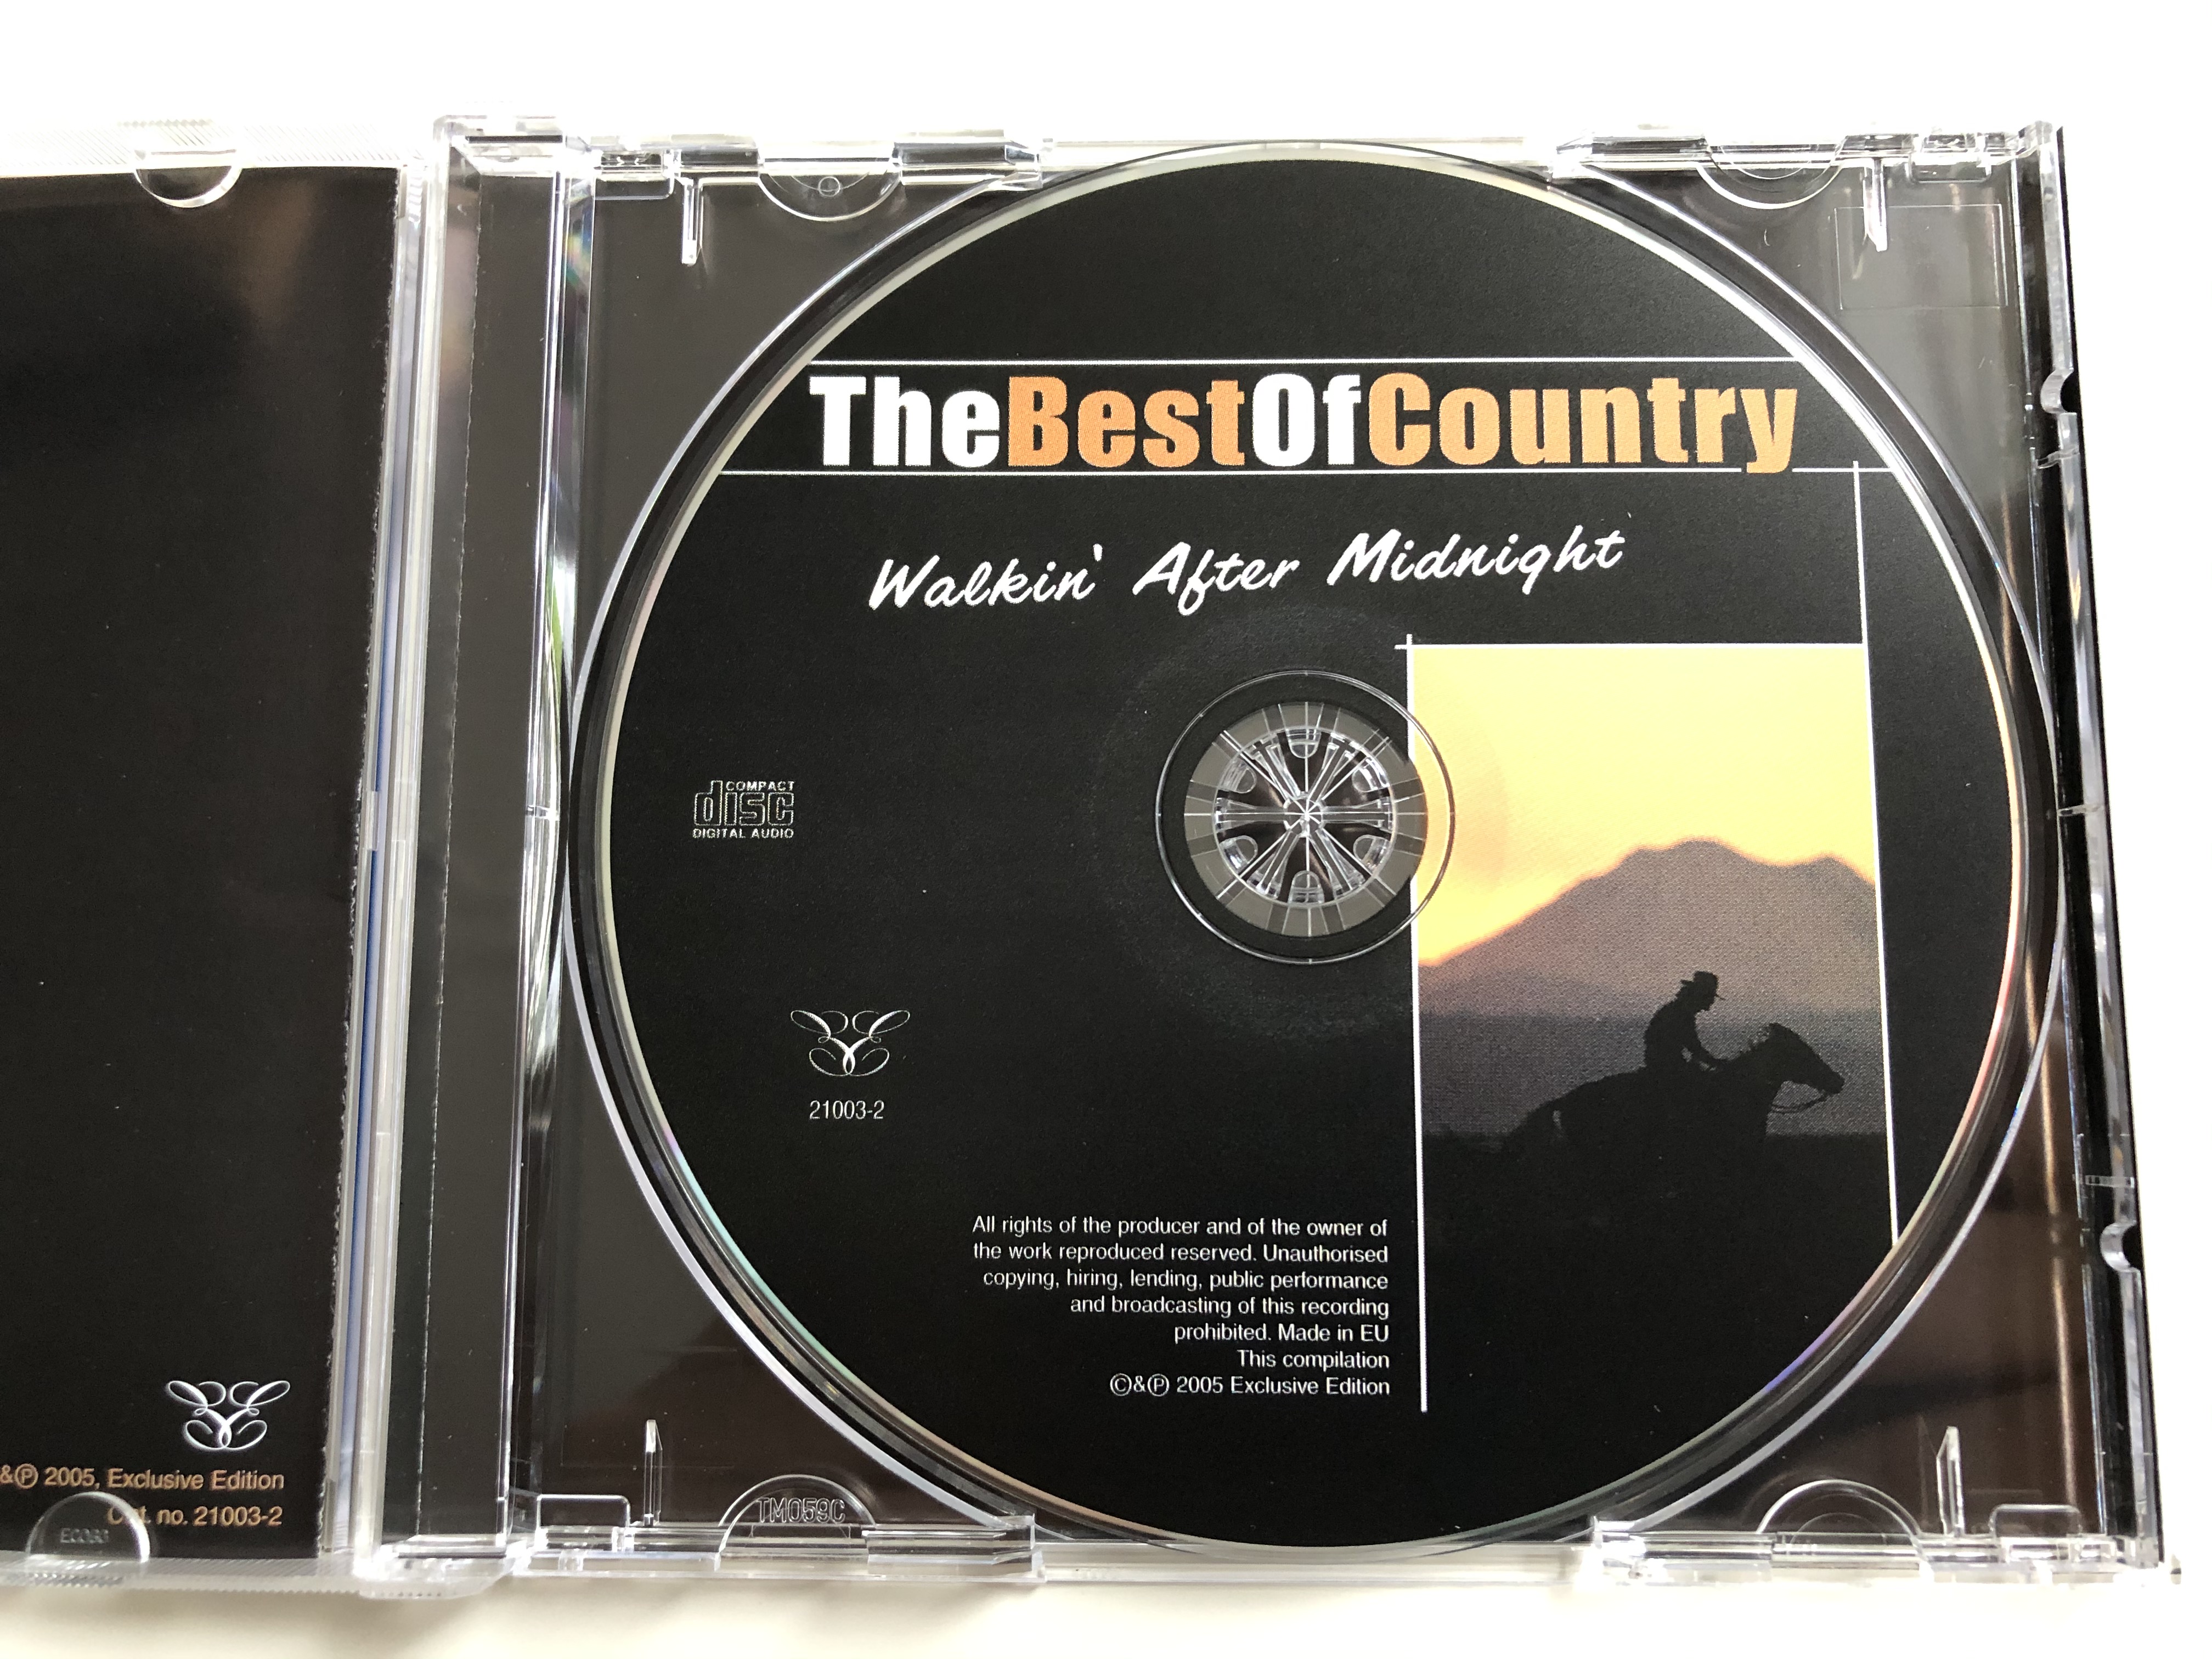 the-best-of-country-walkin-after-midnight-rose-garden-wings-of-a-dove-rawhide-moonlight-gambler-and-many-more-exclusive-edition-audio-cd-2005-21003-2-4-.jpg